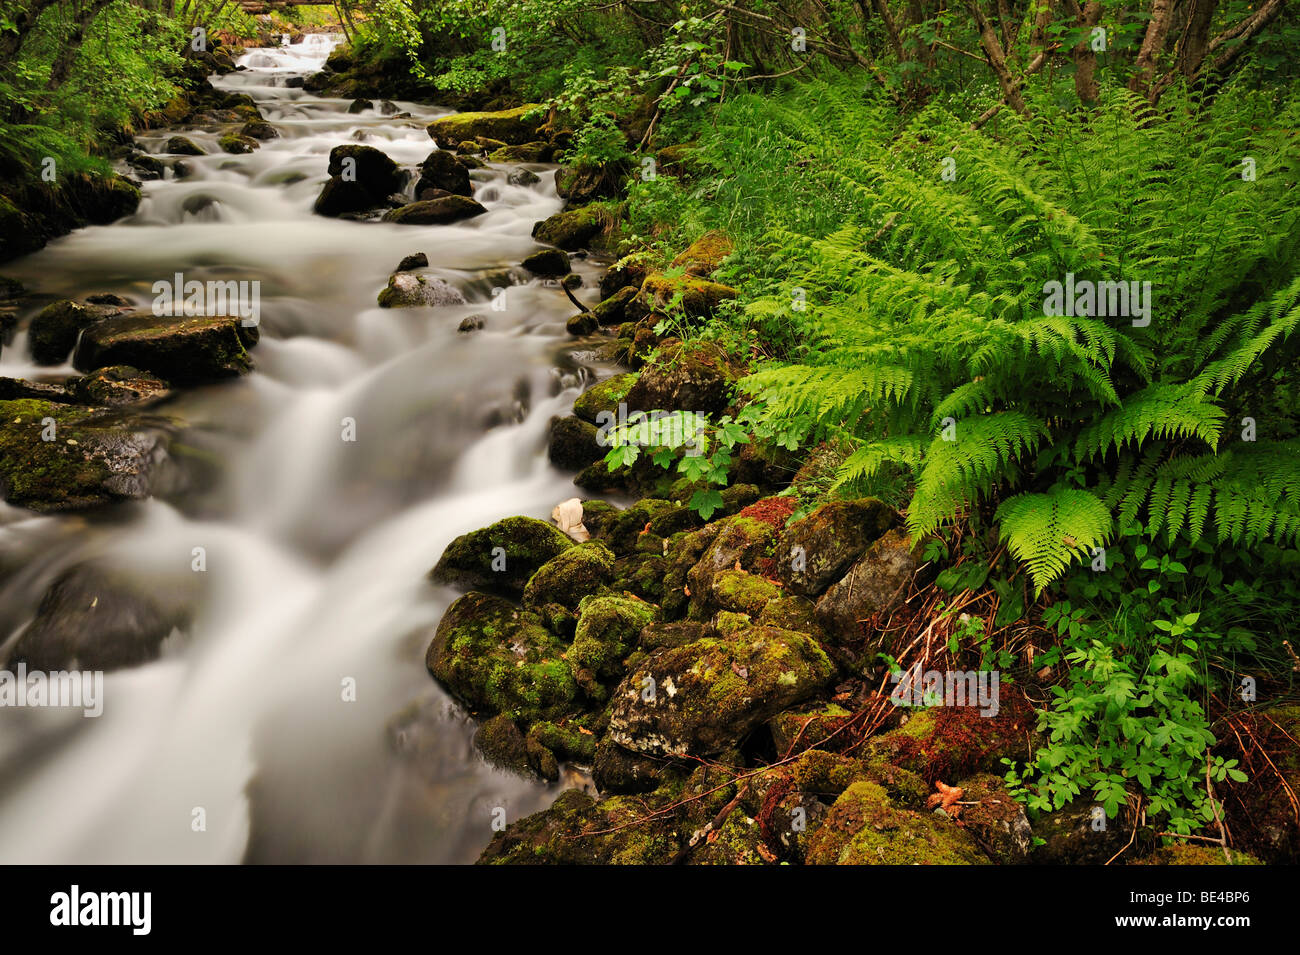 Small river, ferns in the foreground, Geiranger, Norway, Scandinavia, Europe Stock Photo